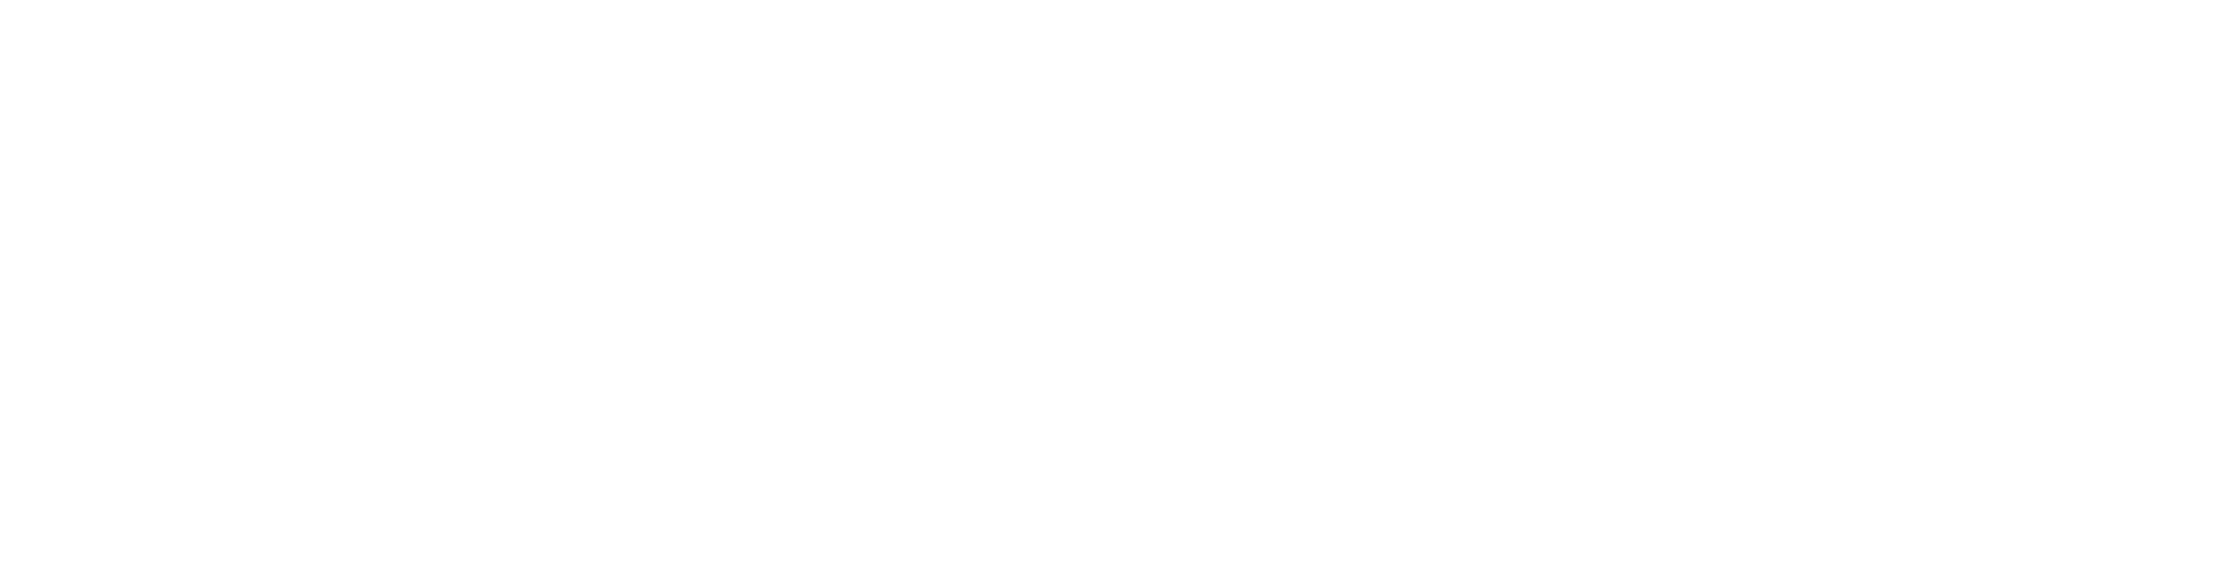 42-423505_forbes-logo-black-and-white-forbes-logo-white.png